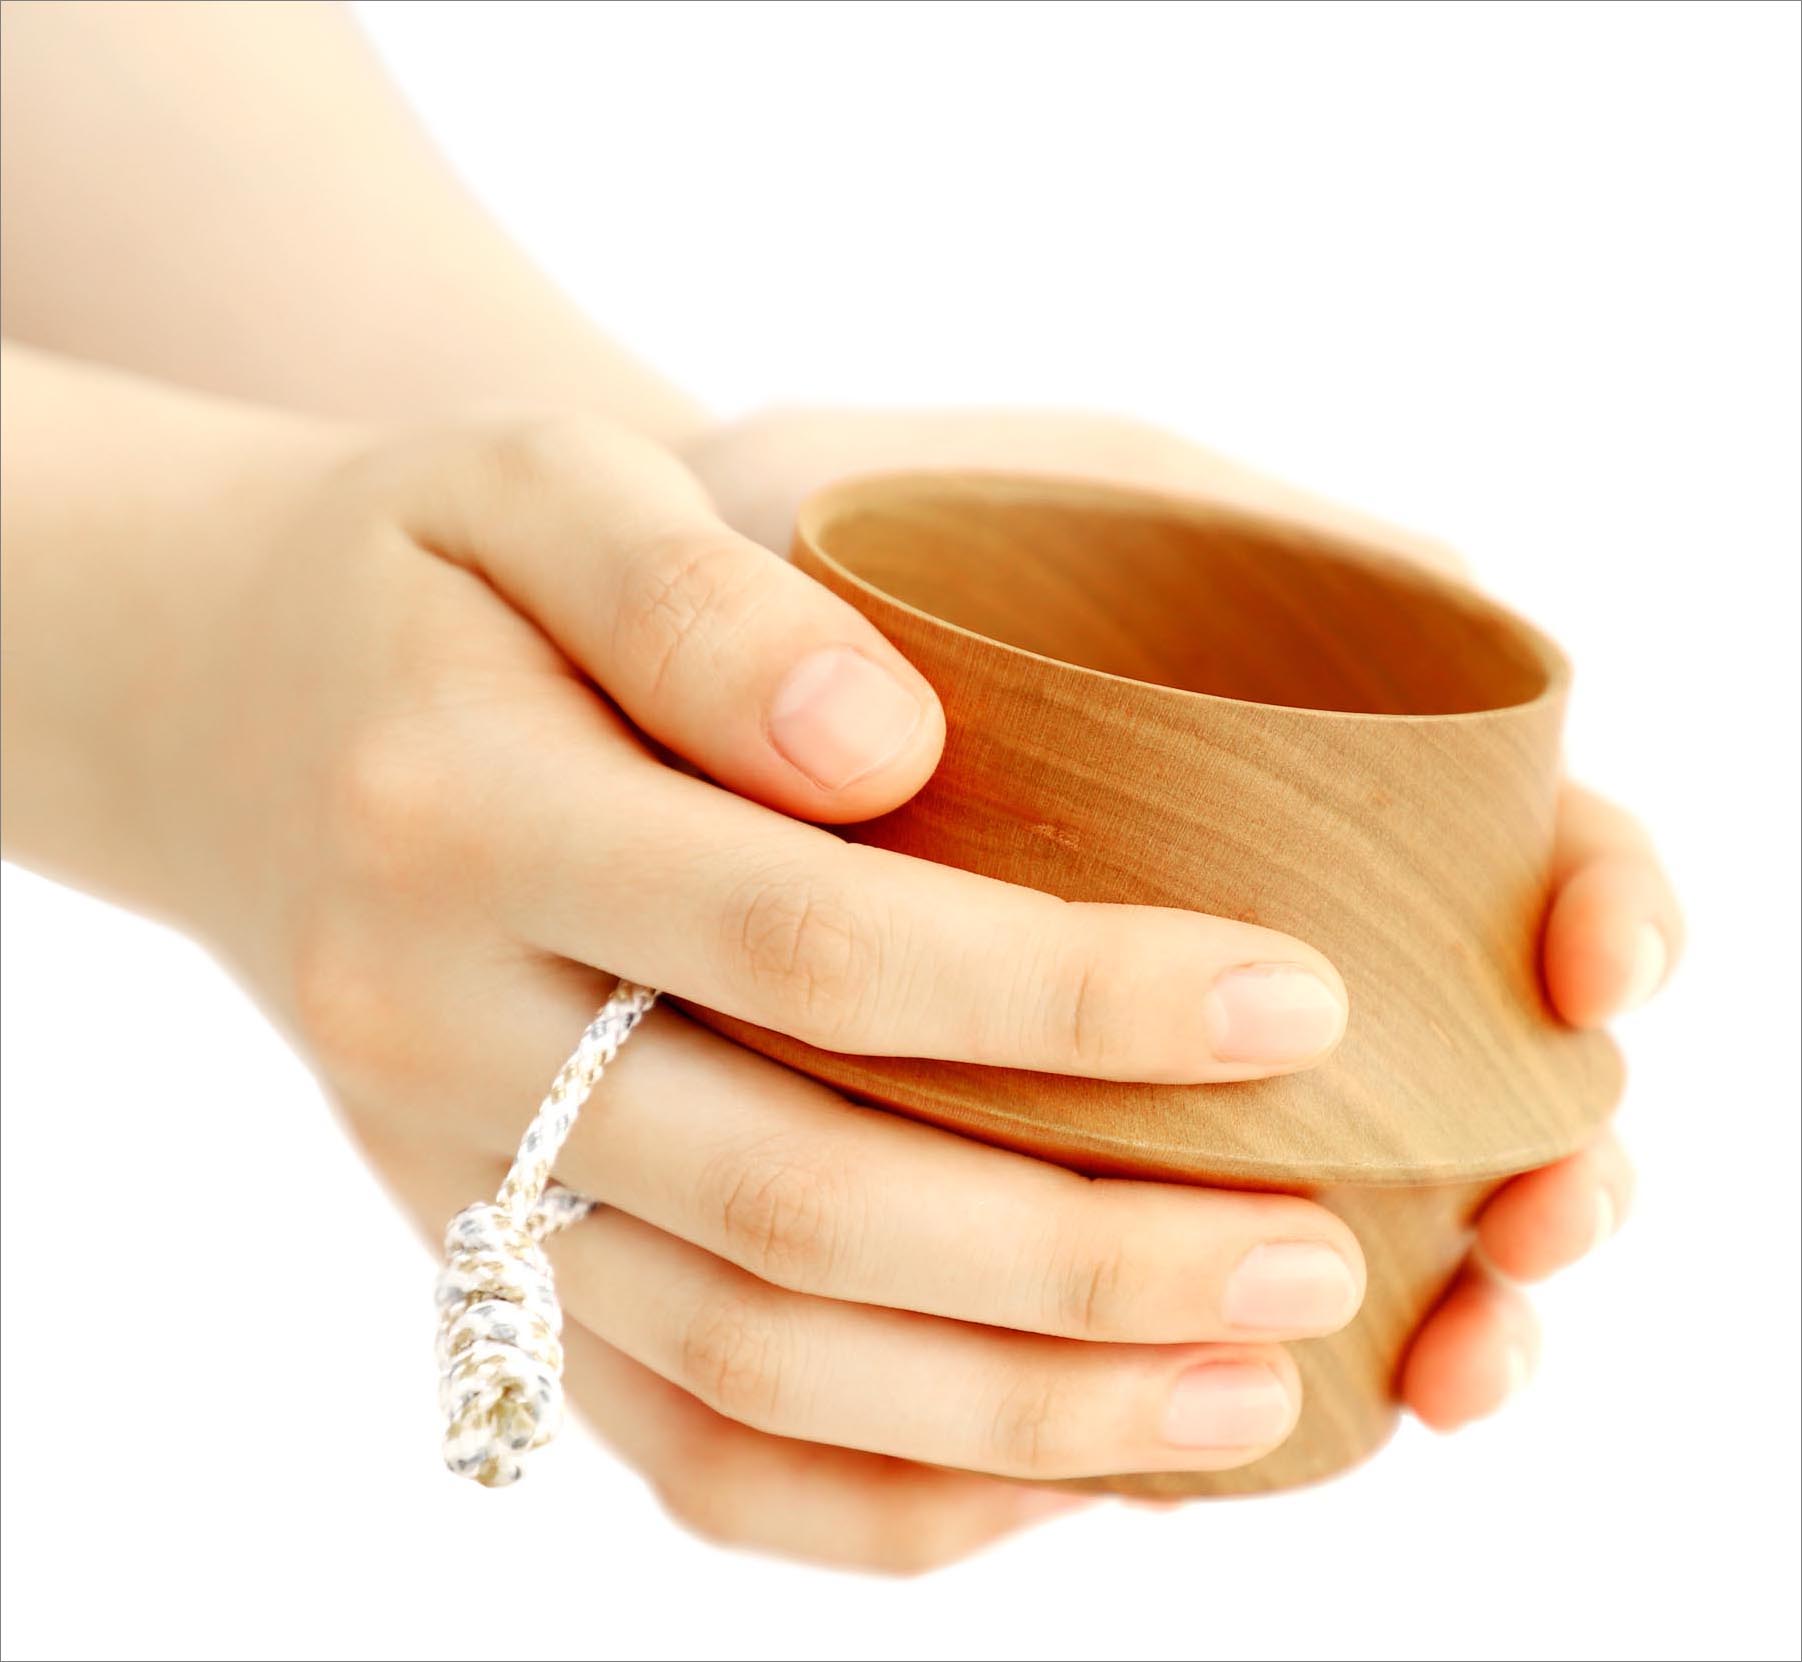 The design inspiration comes from wrapping with both hands. Its unique shape expresses the love for natural resources, and when using the cup to drink something and it being close to your mouth, the soft wooden scent flows in the air.